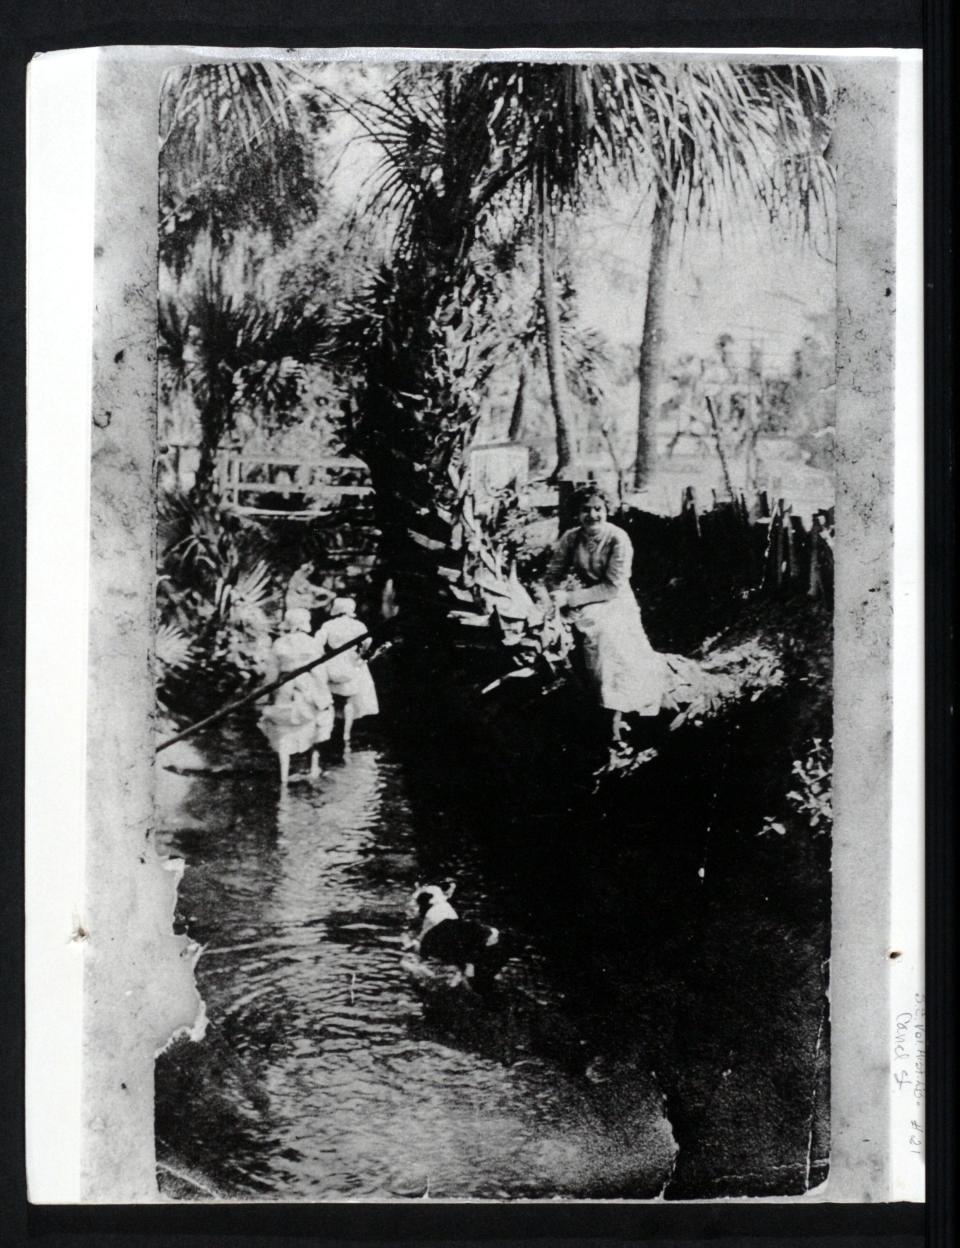 Photo shows part of the Turnbull Canal's north segment, which the city of New Smyrna Beach covered with sidewalk in 1924.